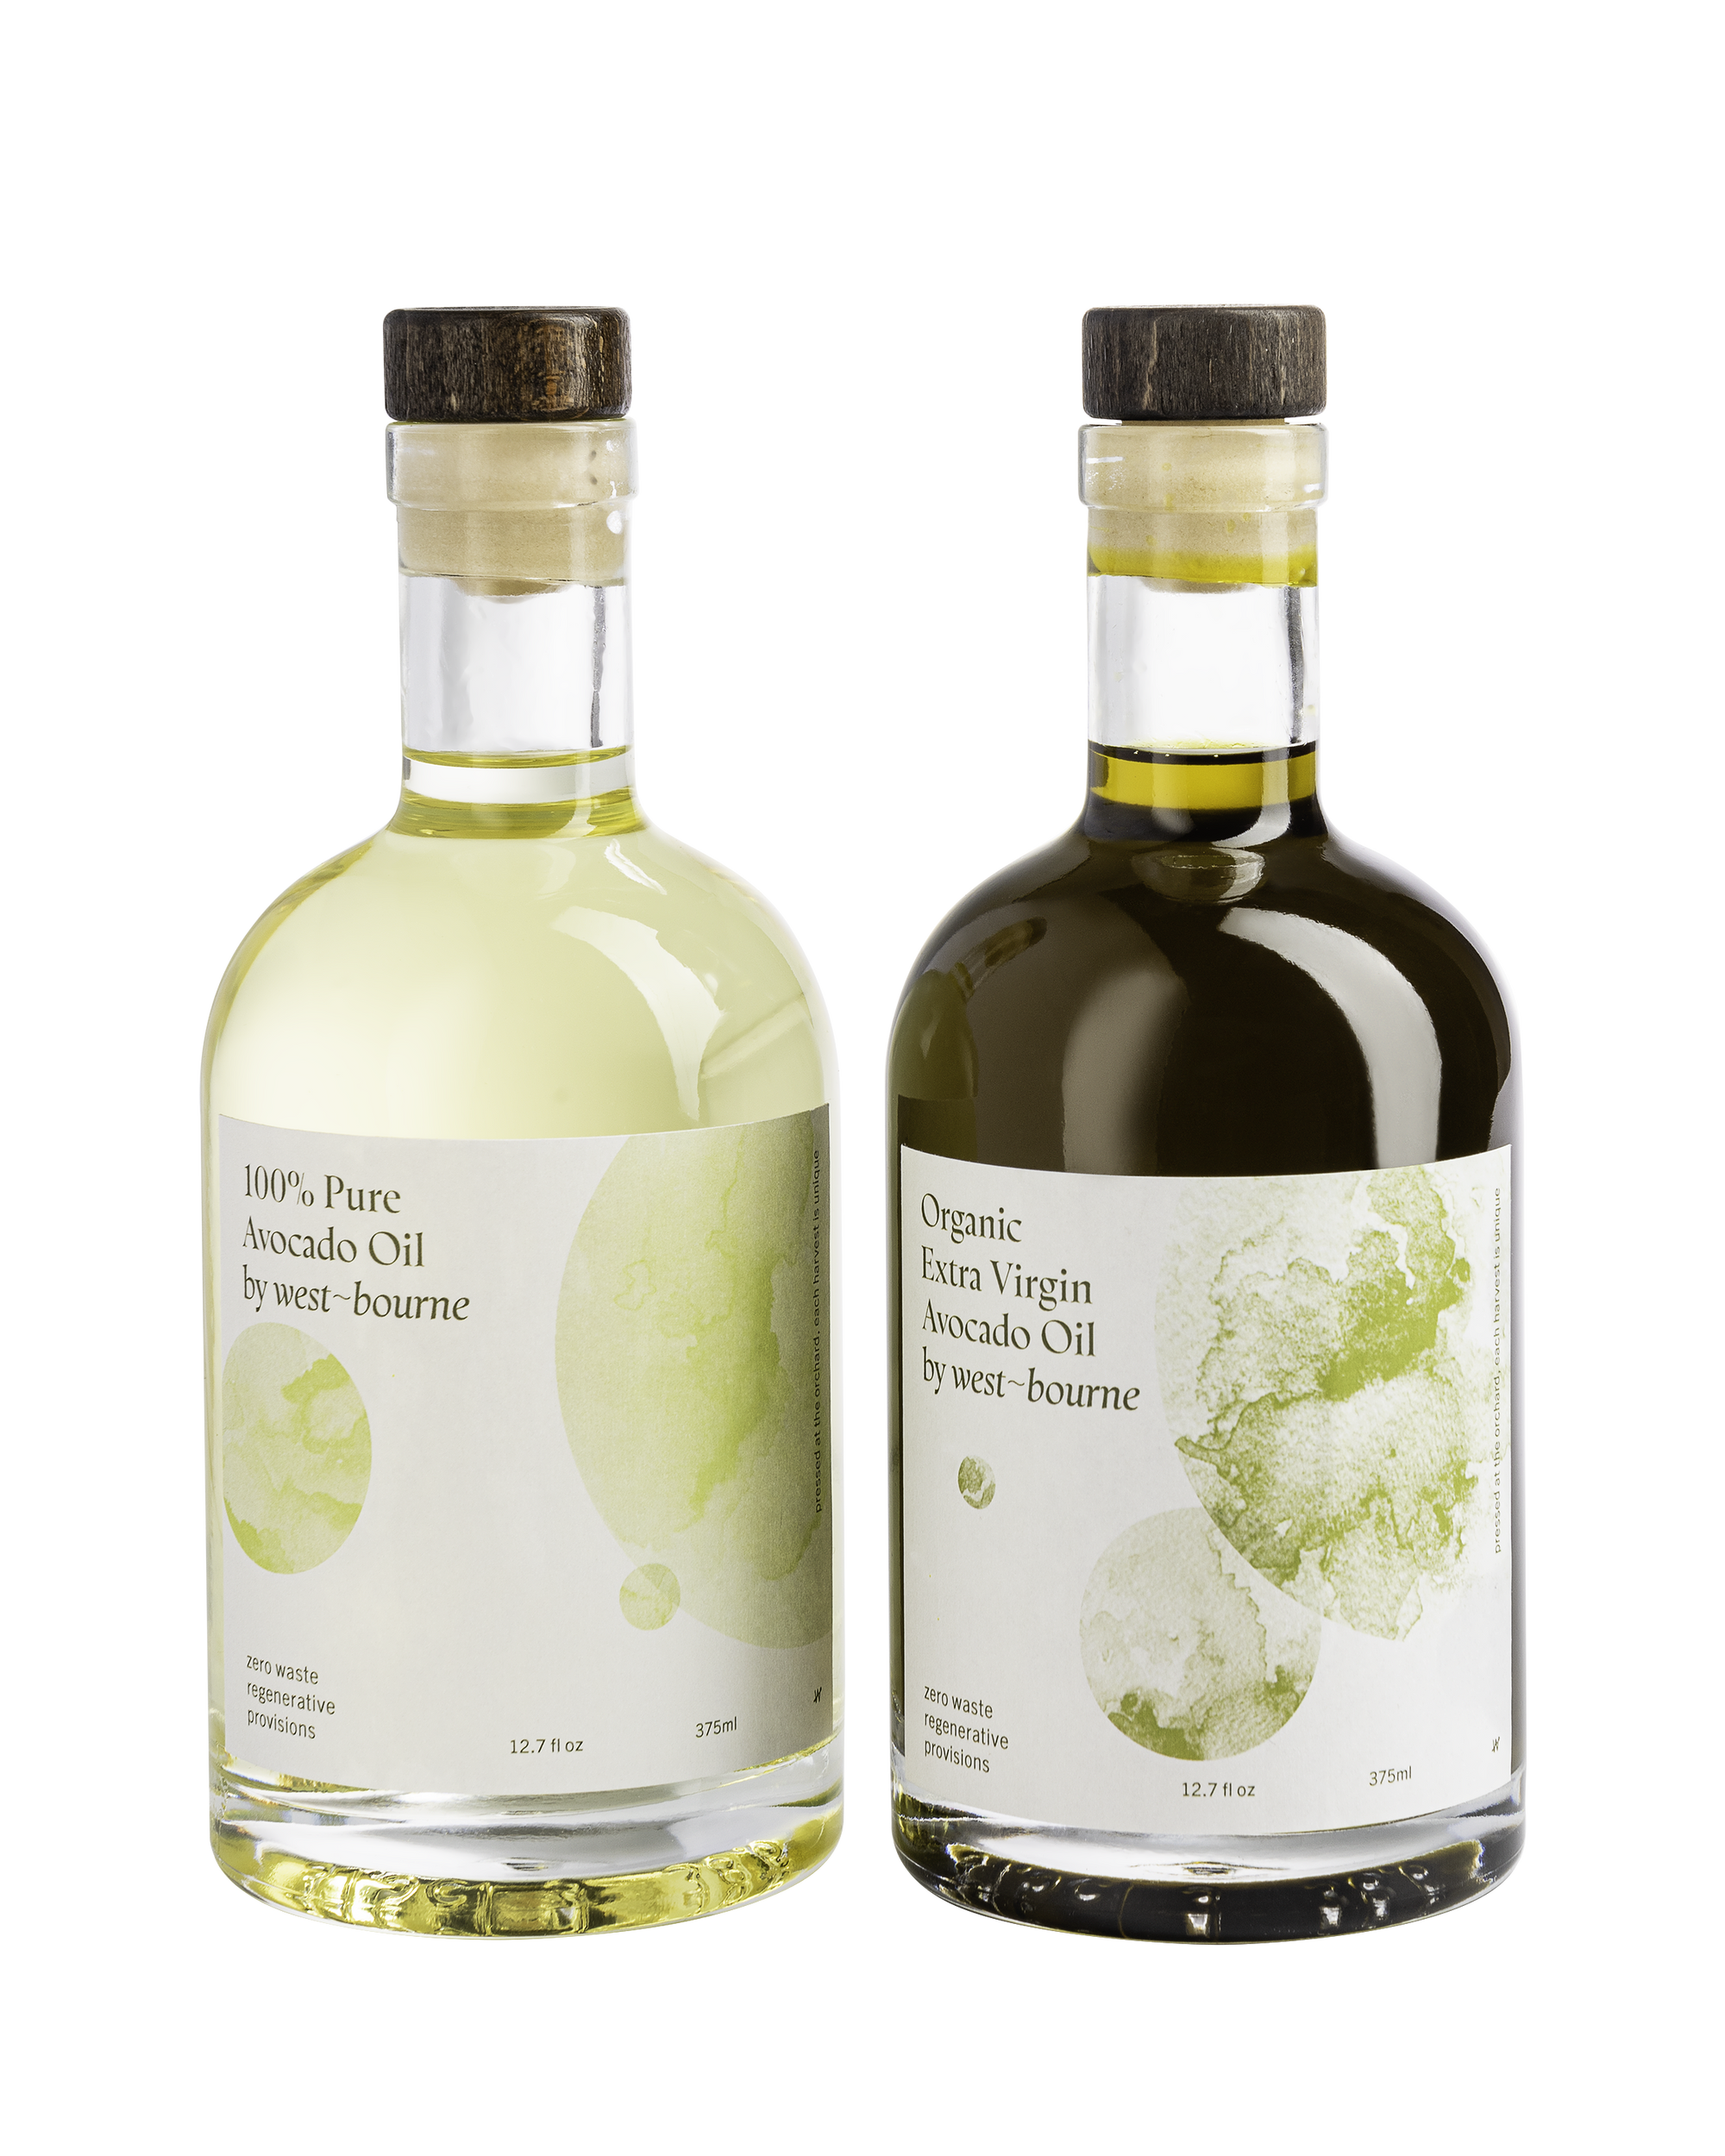 100% Pure Avocado Oil for Cooking